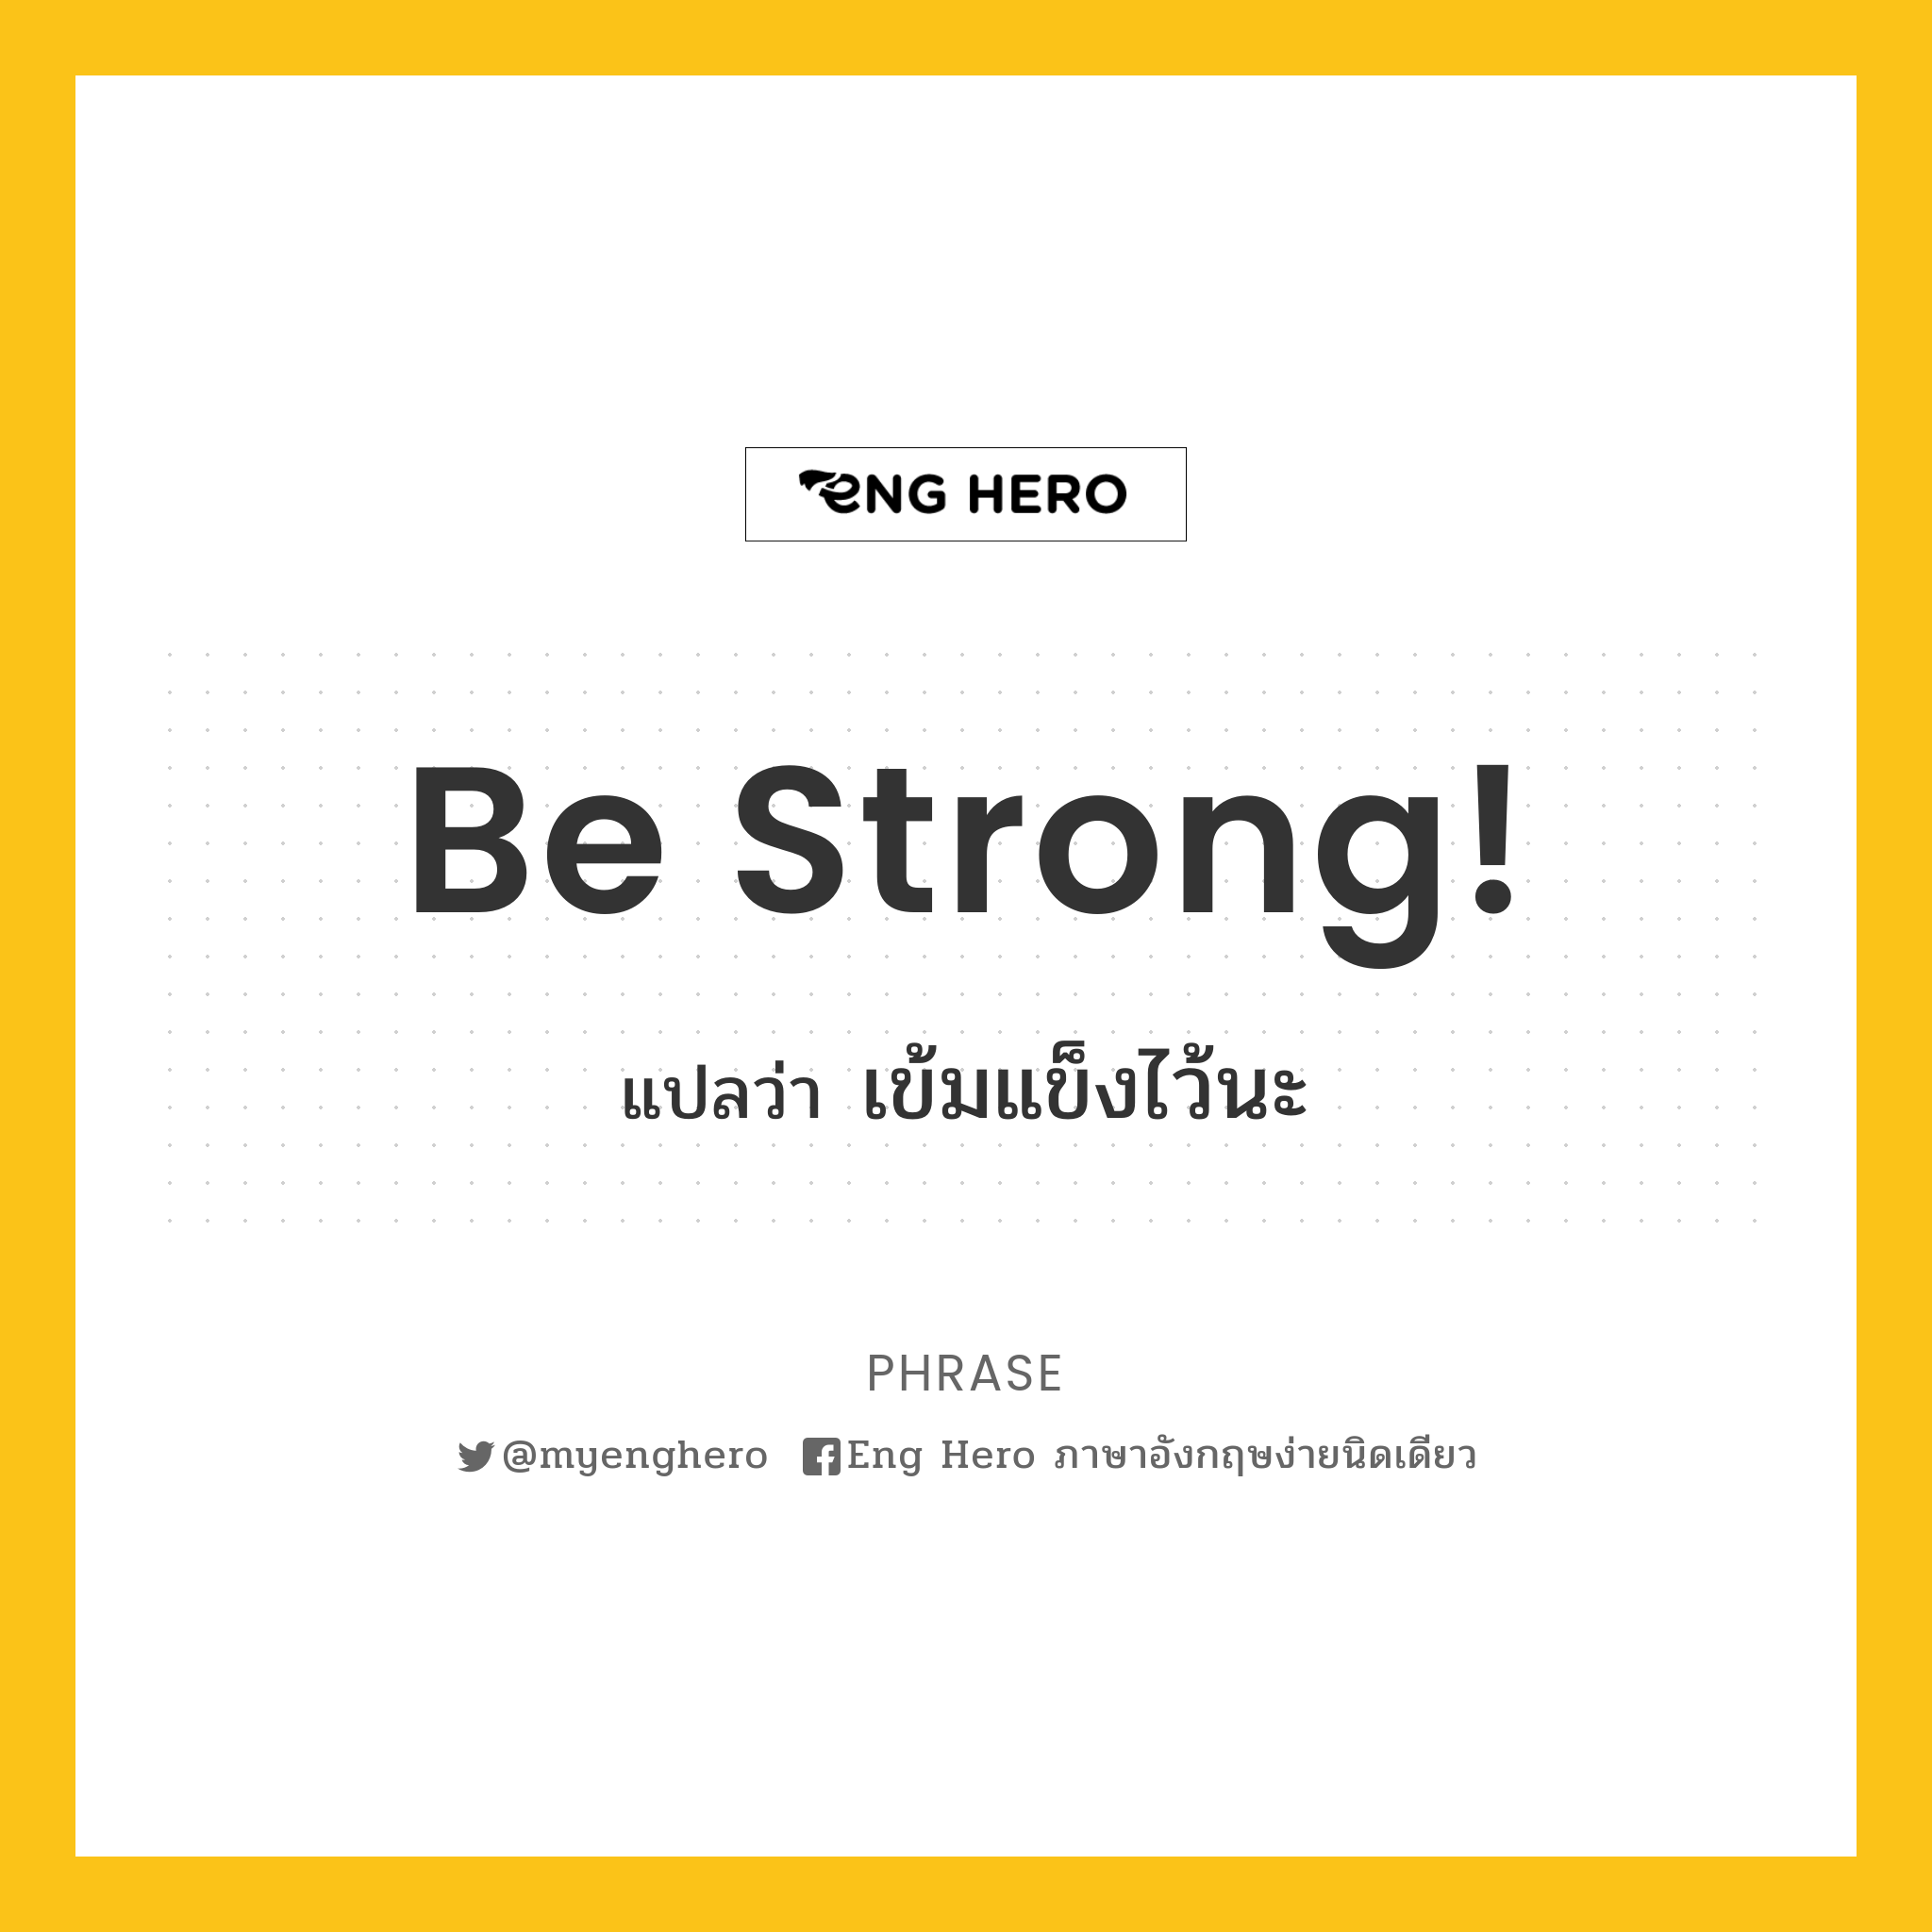 Be strong!